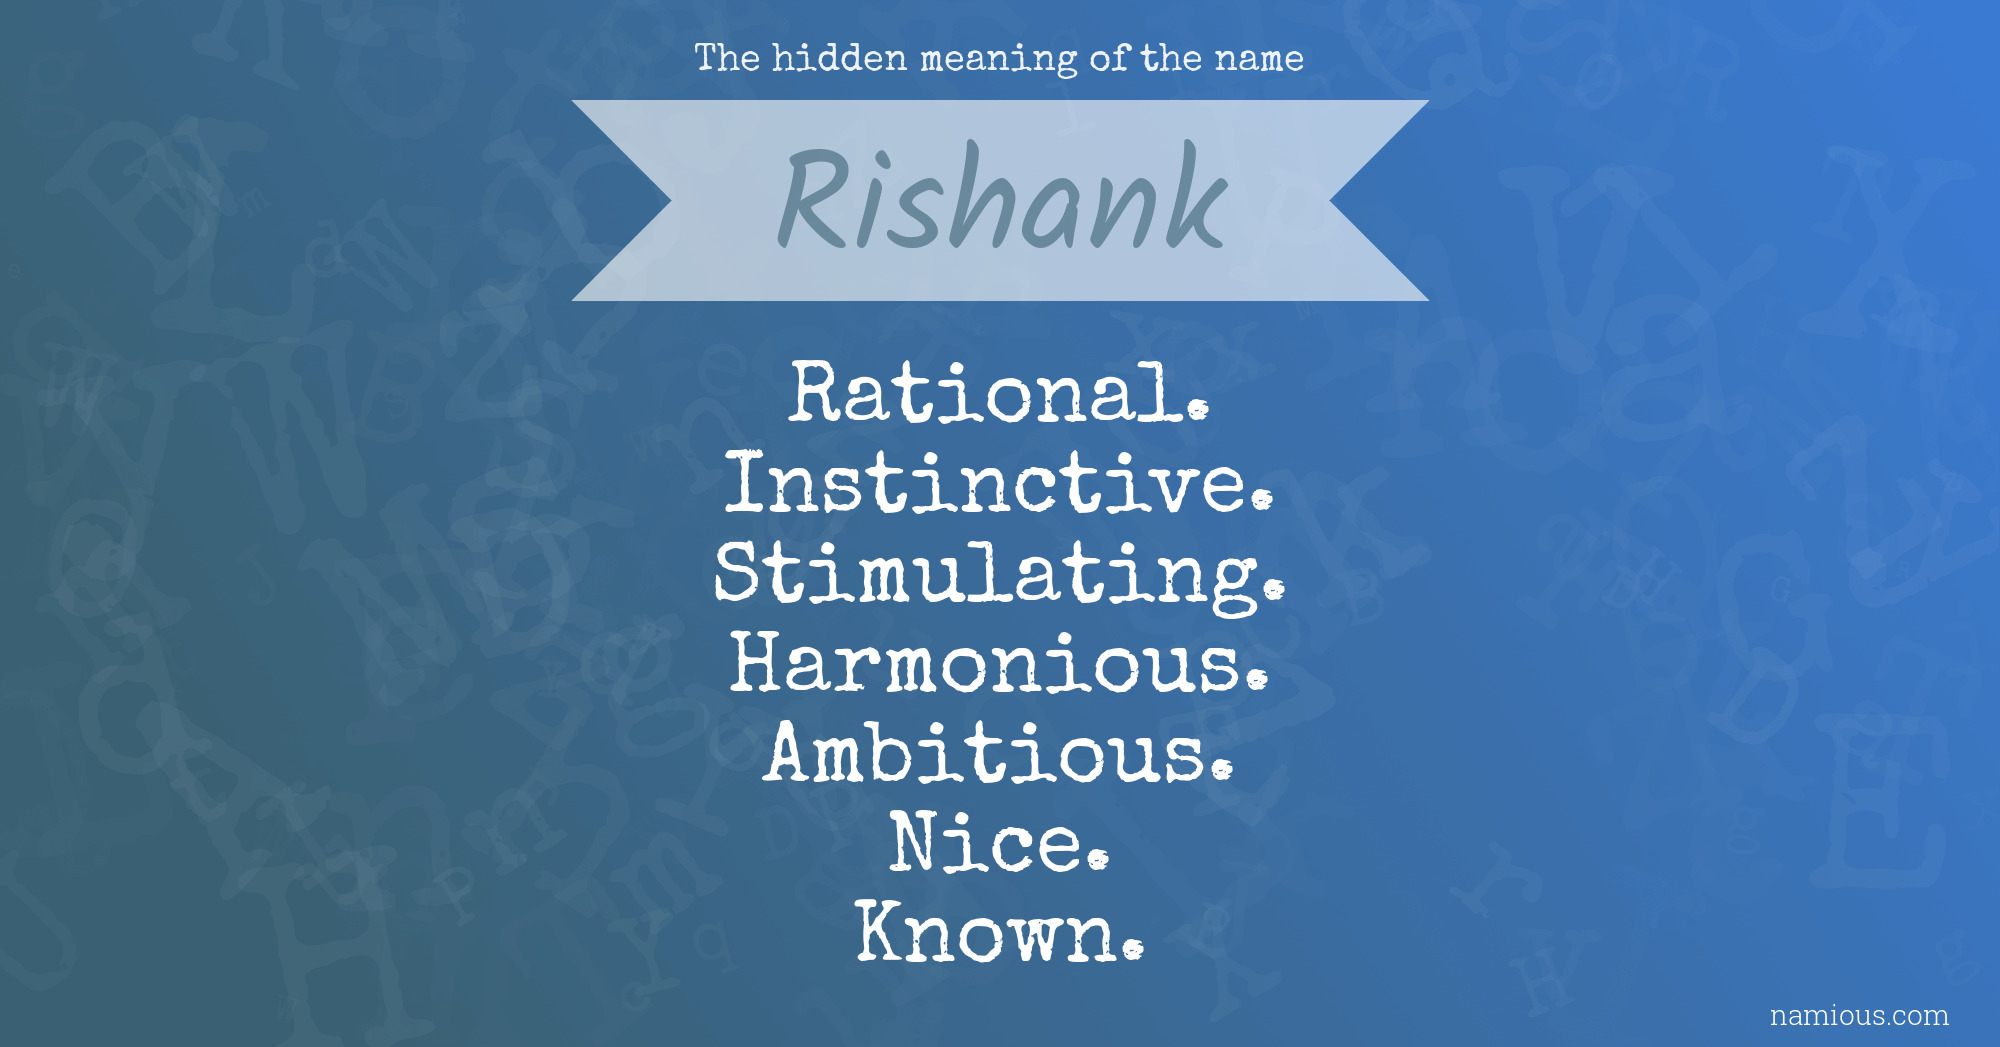 The hidden meaning of the name Rishank